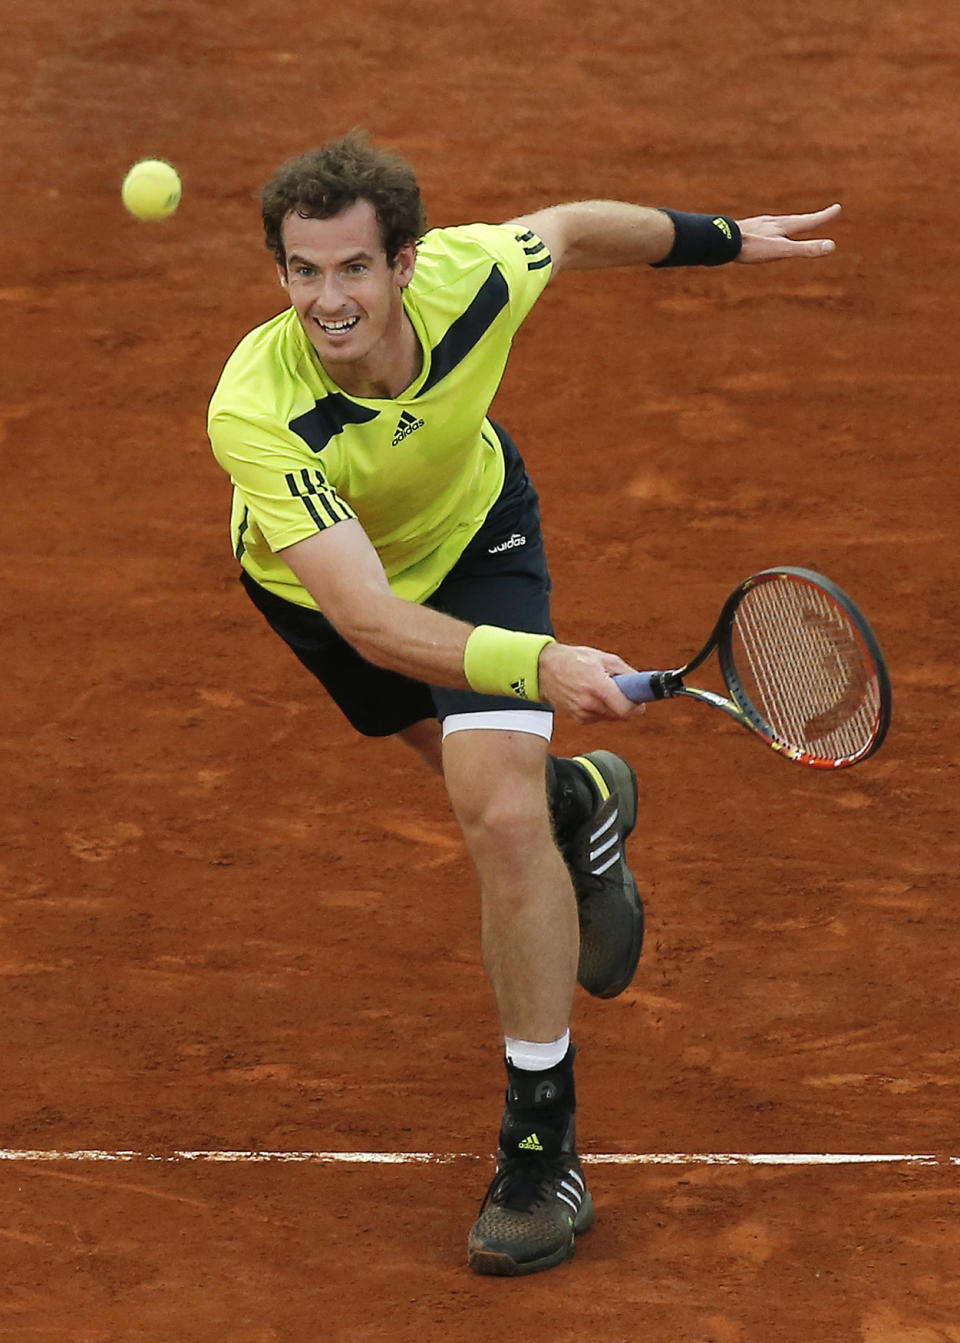 Andy Murray returns the ball during a Madrid Open tennis tournament match against Nicolas Almagro from Spain, in Madrid, Spain, Wednesday, May 7, 2014. (AP Photo/Andres Kudacki)